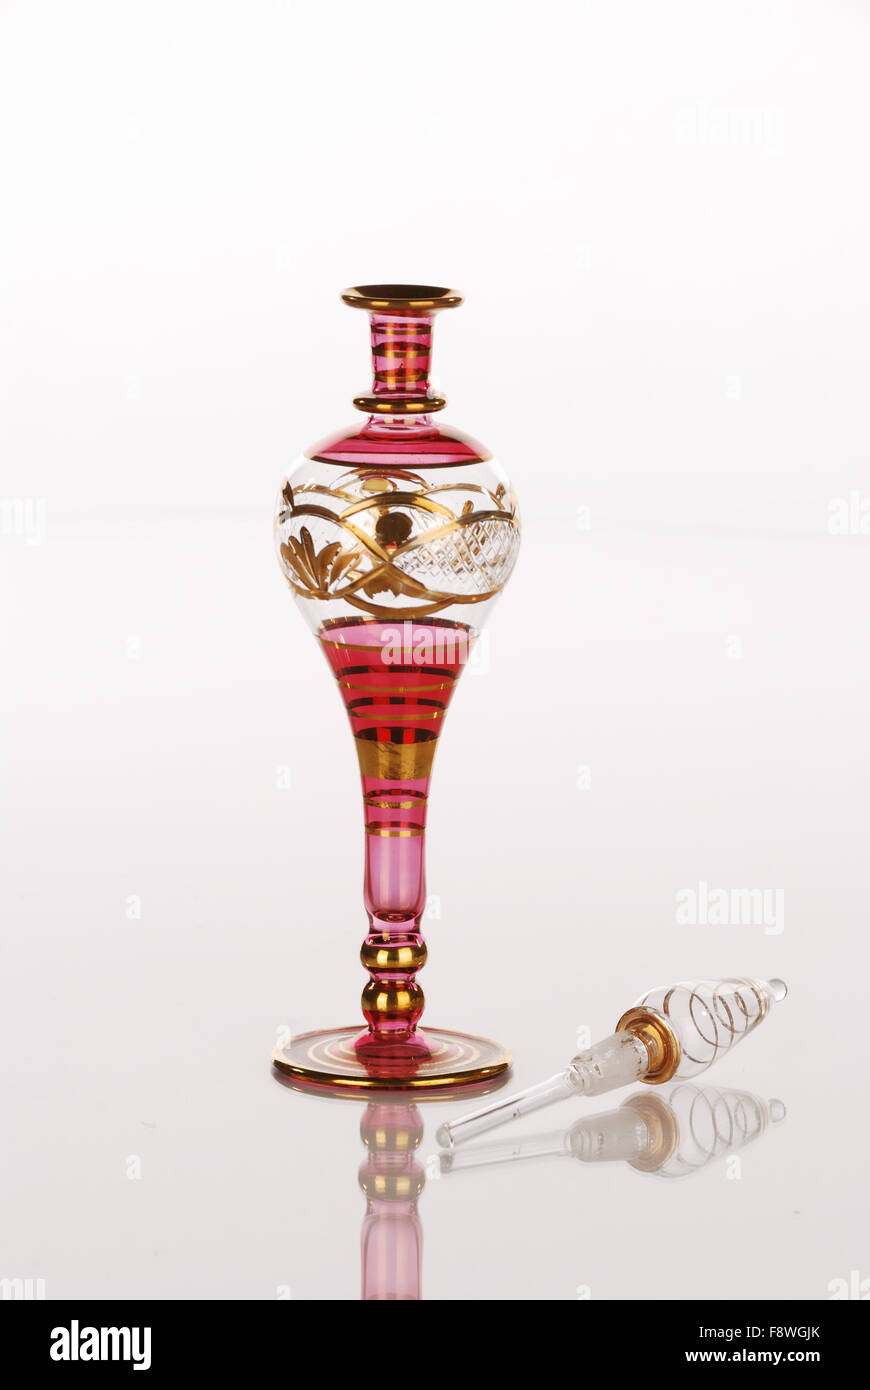 14k Yellow Gold Filigree Genie Bottle / Wine Decanter + Seed Pearl